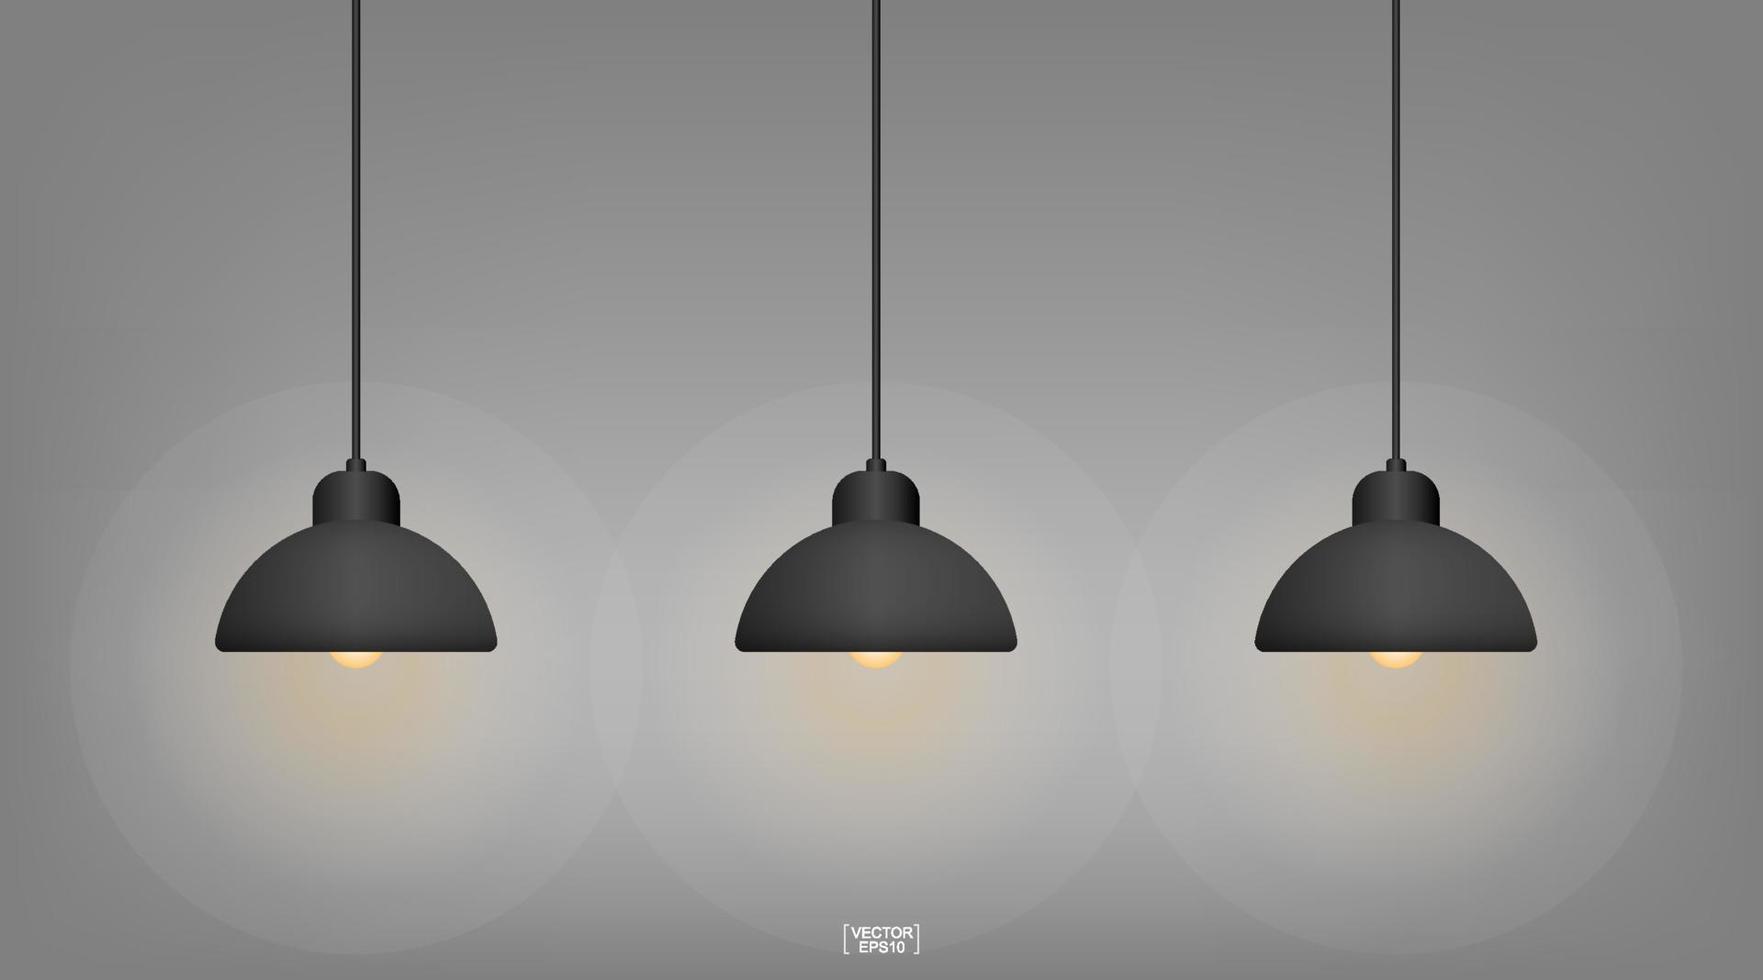 Abstract light bulb hanging ceiling lamp for interior decoration idea. Vector. vector